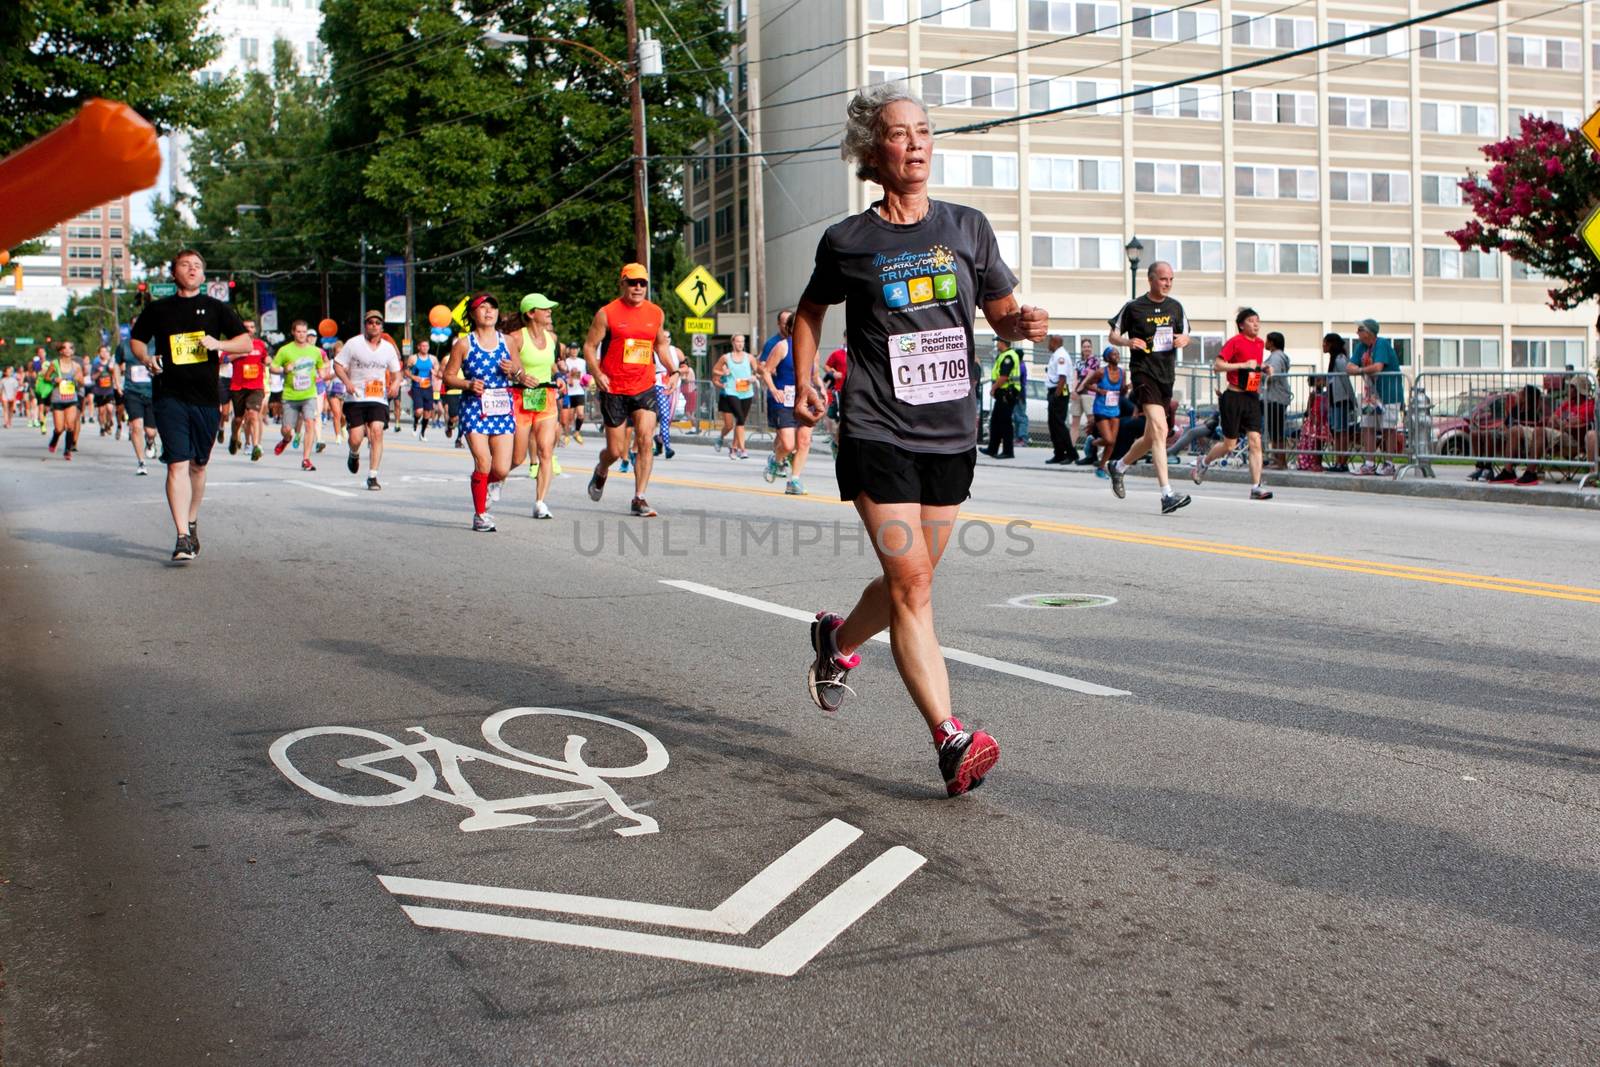 Atlanta, GA, USA - July 4, 2014:  A senior woman runs toward the finish line in the Peachtree Road Race on Independence Day.